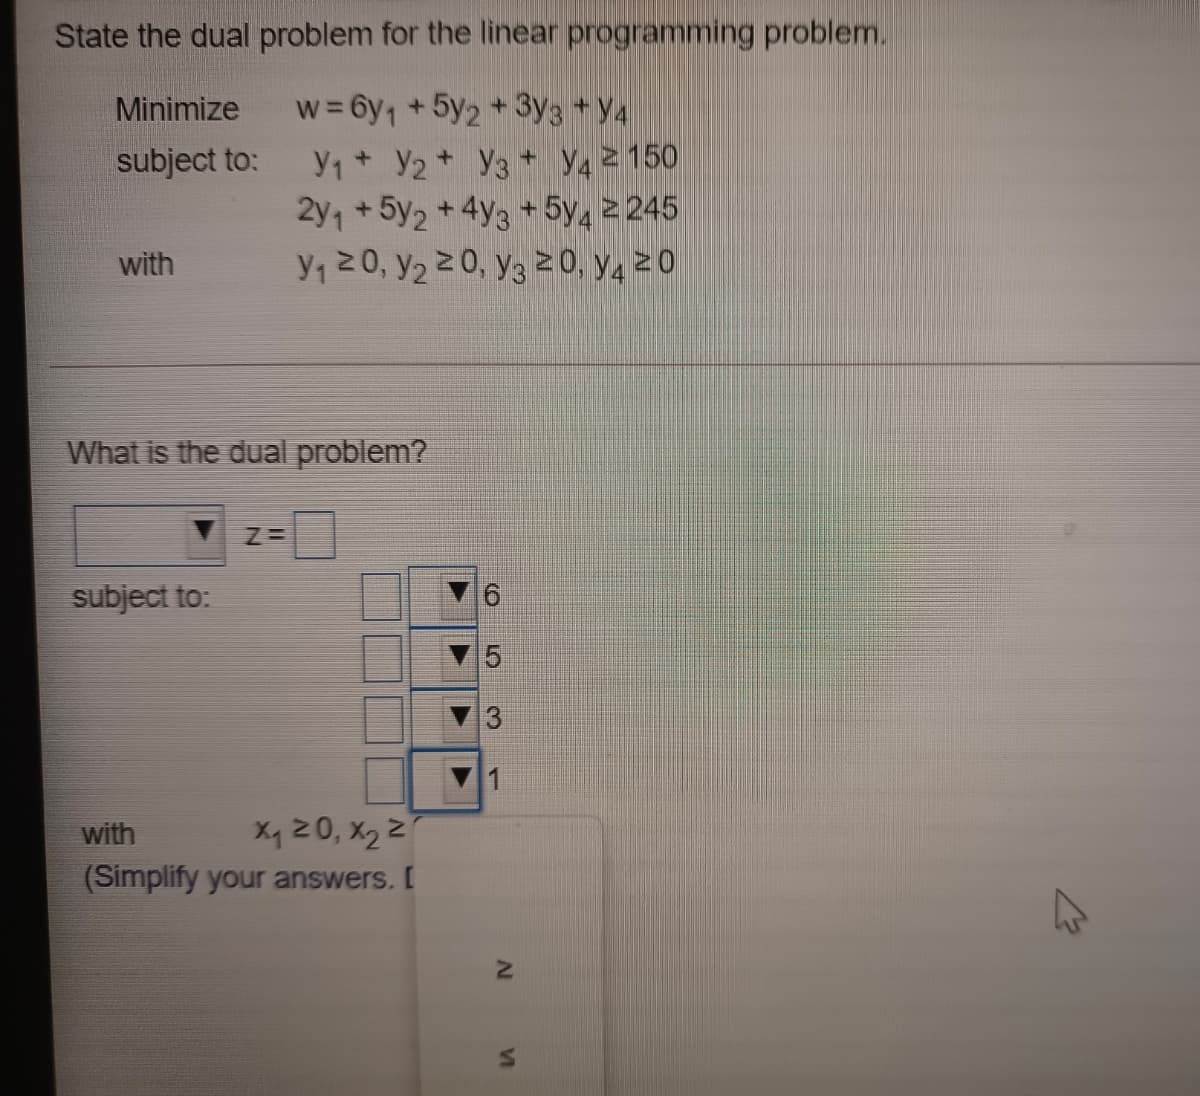 State the dual problem for the linear programming problem.
w = 6y1 +5y2+3y3 +Y4
Y1+ Y2+ Y3 + Y4 2 150
2y, + 5y2 + 4y3 + 5y, 2 245
Y, 20, y2 20, y3 20, Y4 2 0
Minimize
subject to:
with
What is the dual problem?
subject to:
5
3
1
with
Xq Z0, X2 Z
(Simplify your answers. [
VI
